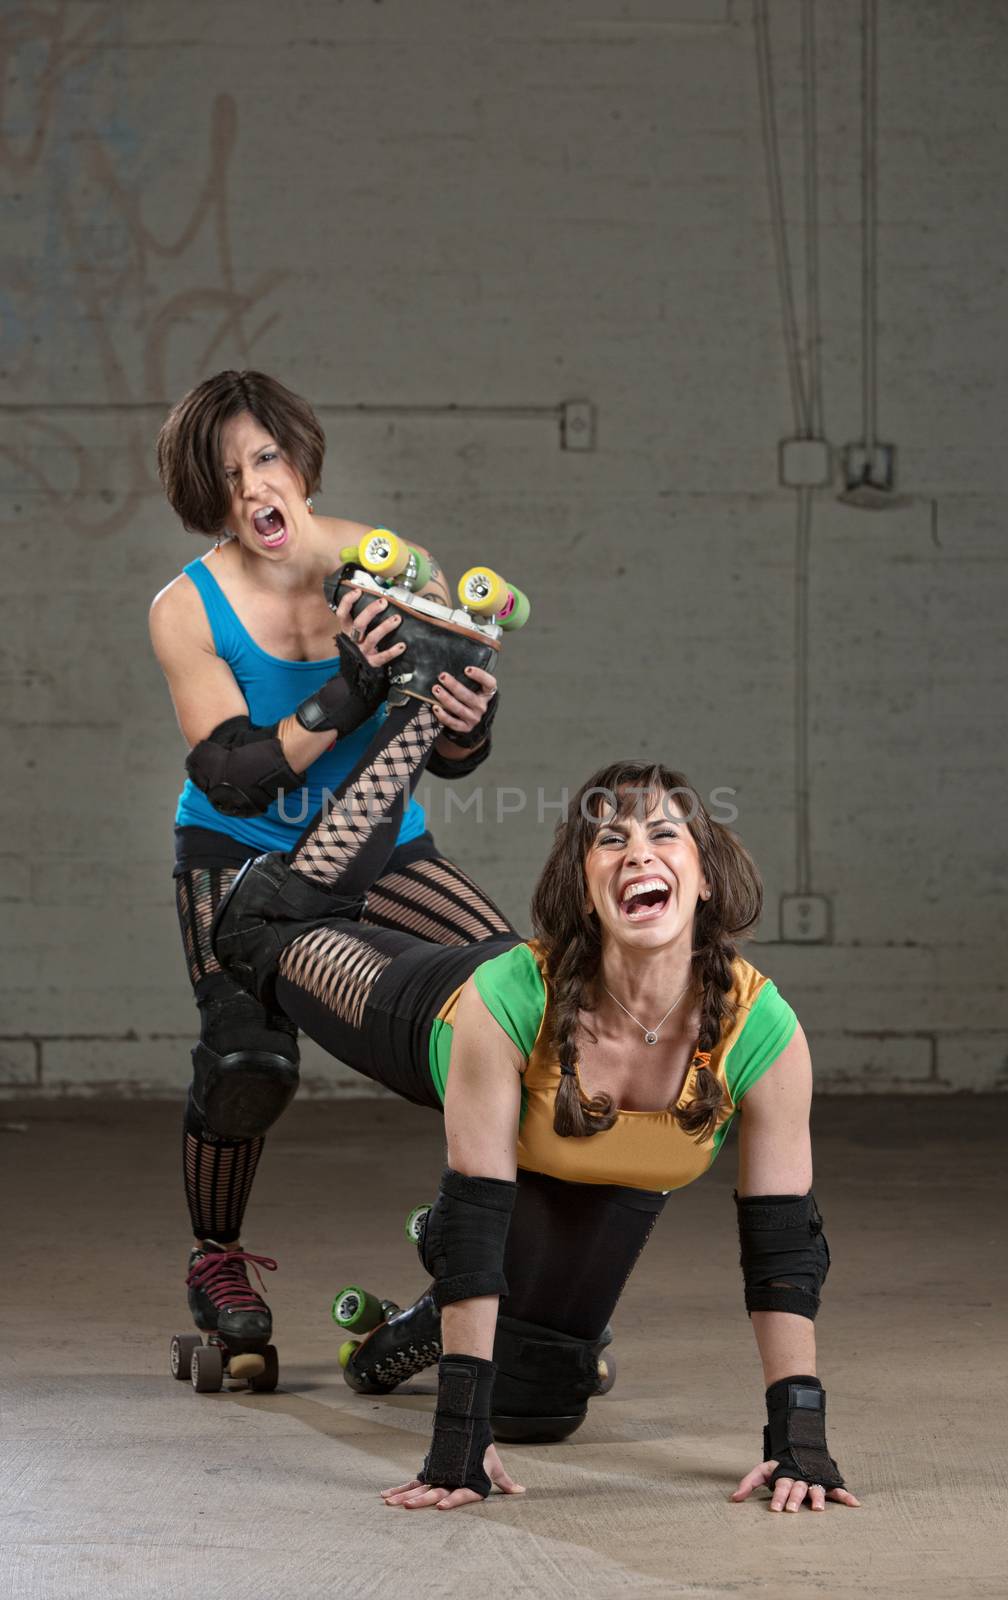 Bully roller derby skater twisting the leg of a woman